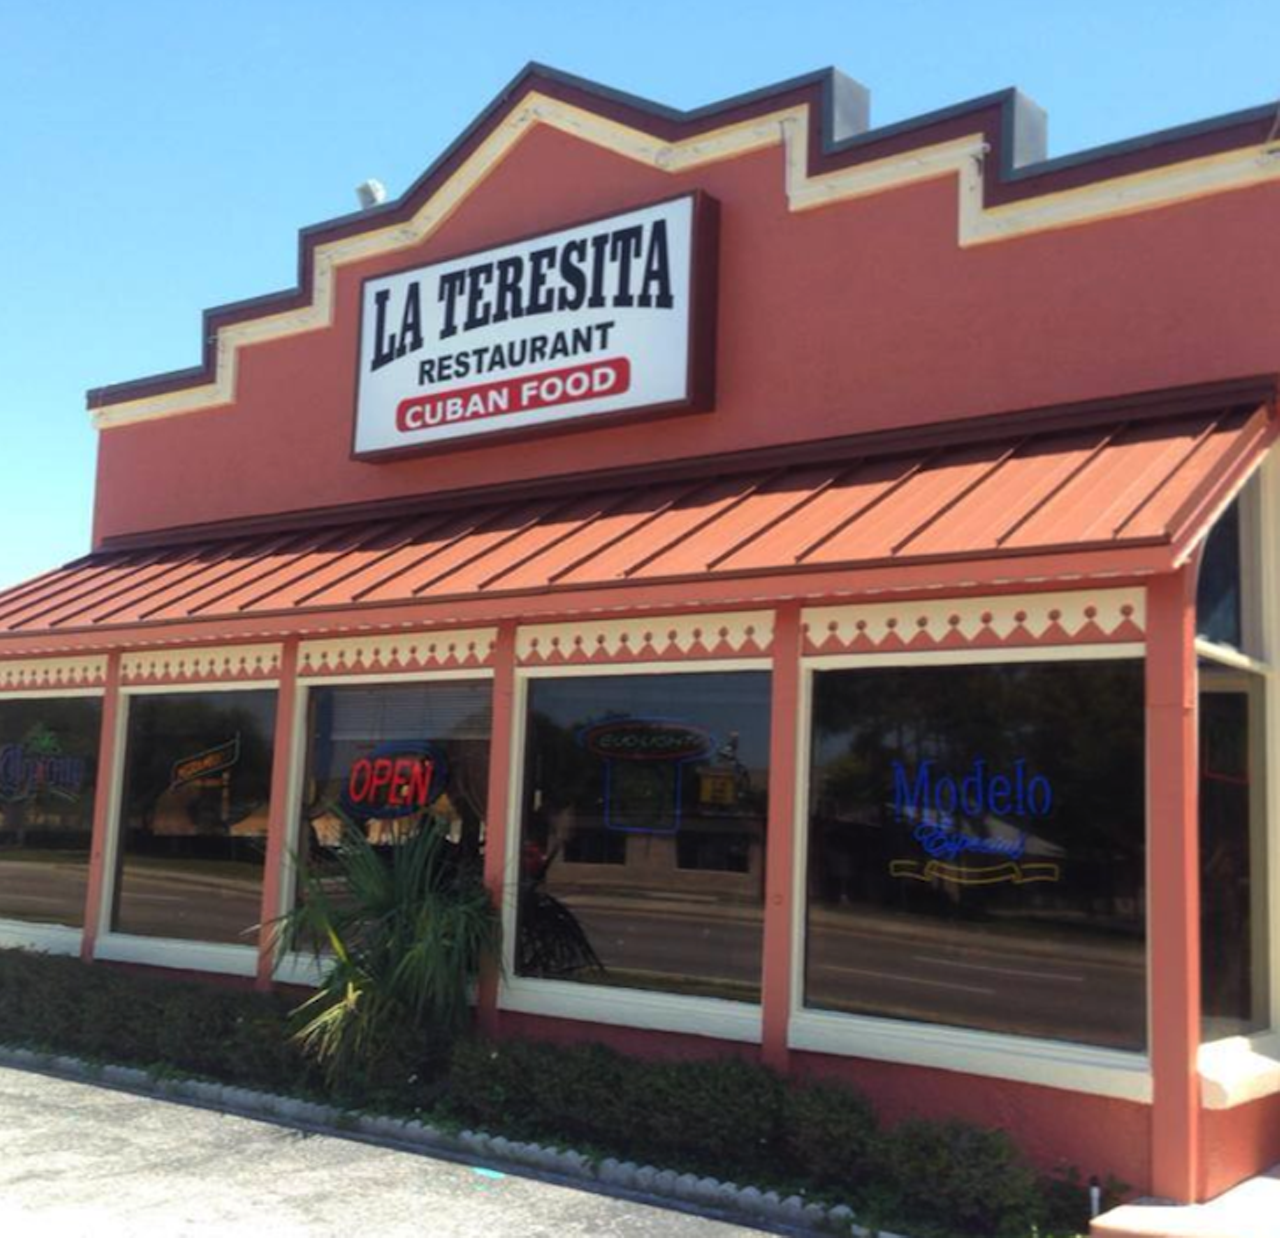 La Teresita Cuban Restaurant   
7101 66th St N, Pinellas Park
If you&#146;re talking Ppark, you have to mention La Teresita Cuban Restaurant which has been serving up Cuban Sandwiches and Spanish Food in Tampa Bay since 1975. You can get fat plates for a steal, and always opt for the daily special.
Photo via  La Teresita Cuban Restaurant/ Facebook